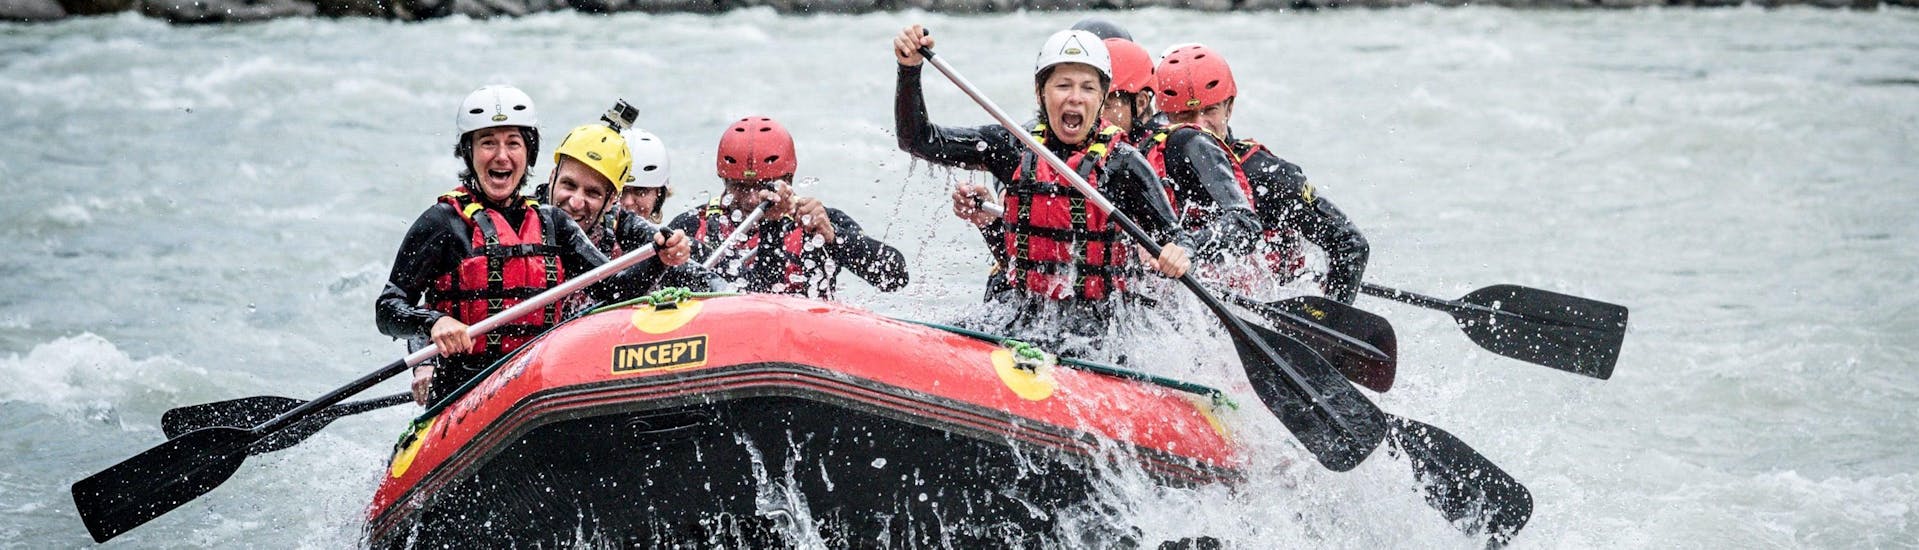 The participants of a rafting tour organized by Natur Pur Outdoorsports are facing splashing rapids in the Ötztal valley.